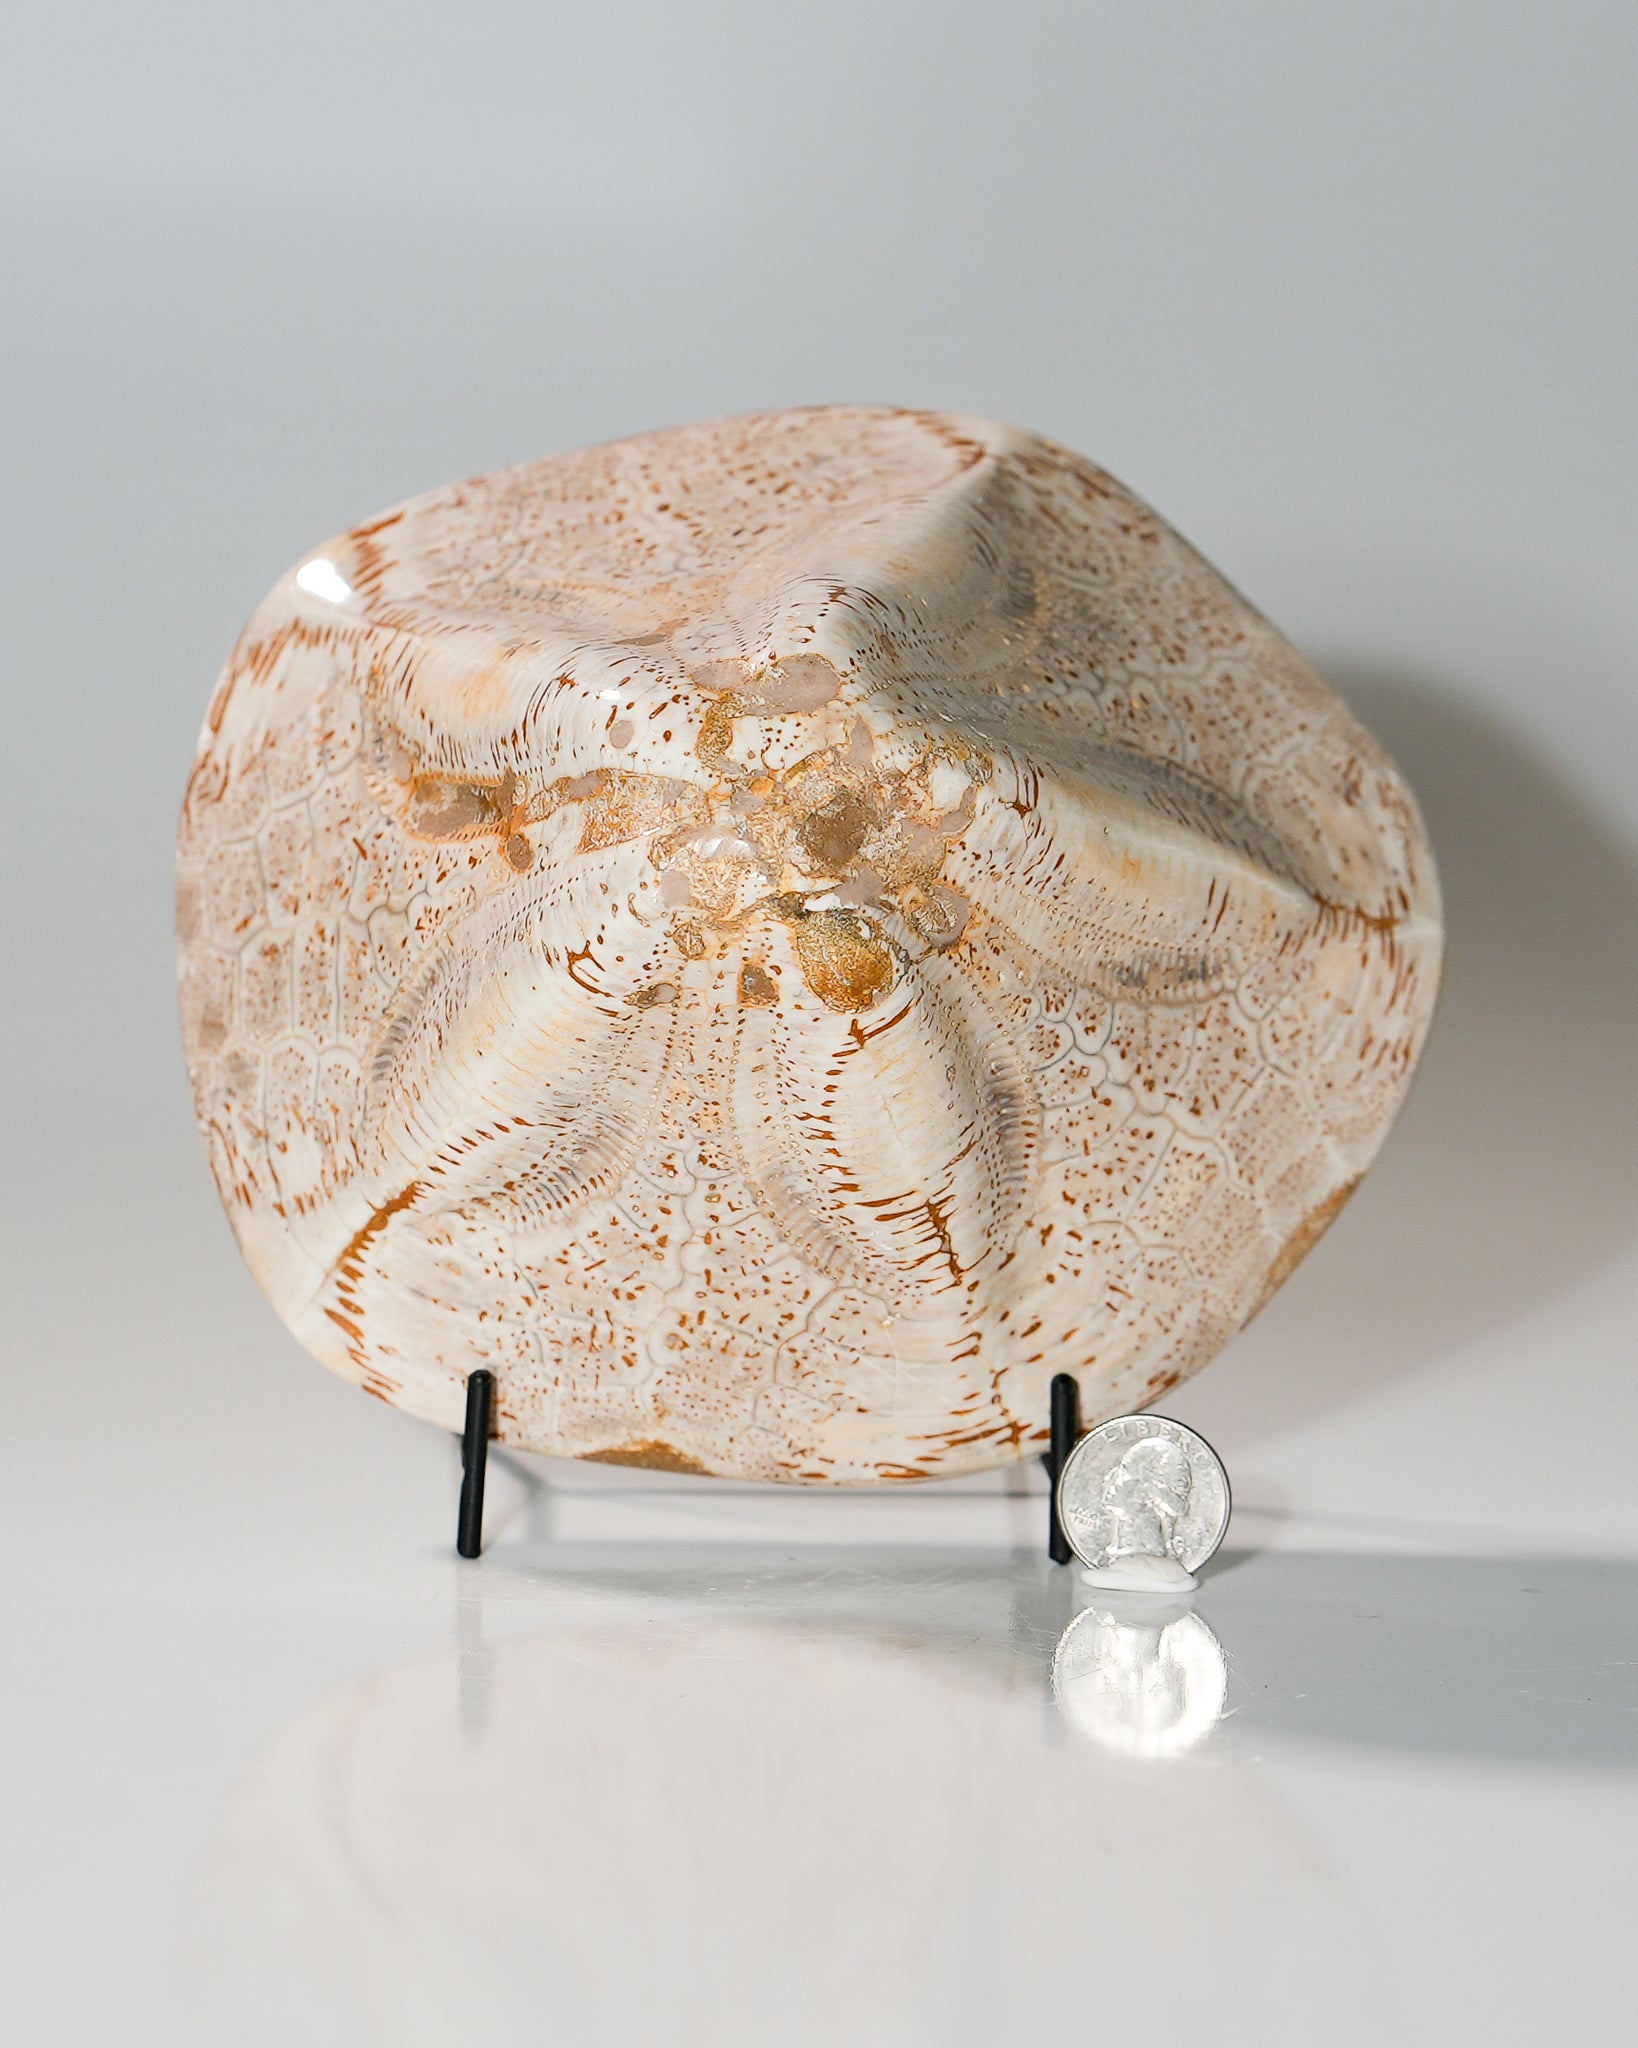 Fossilized Moroccan Miocene Echinoid Clypeaster